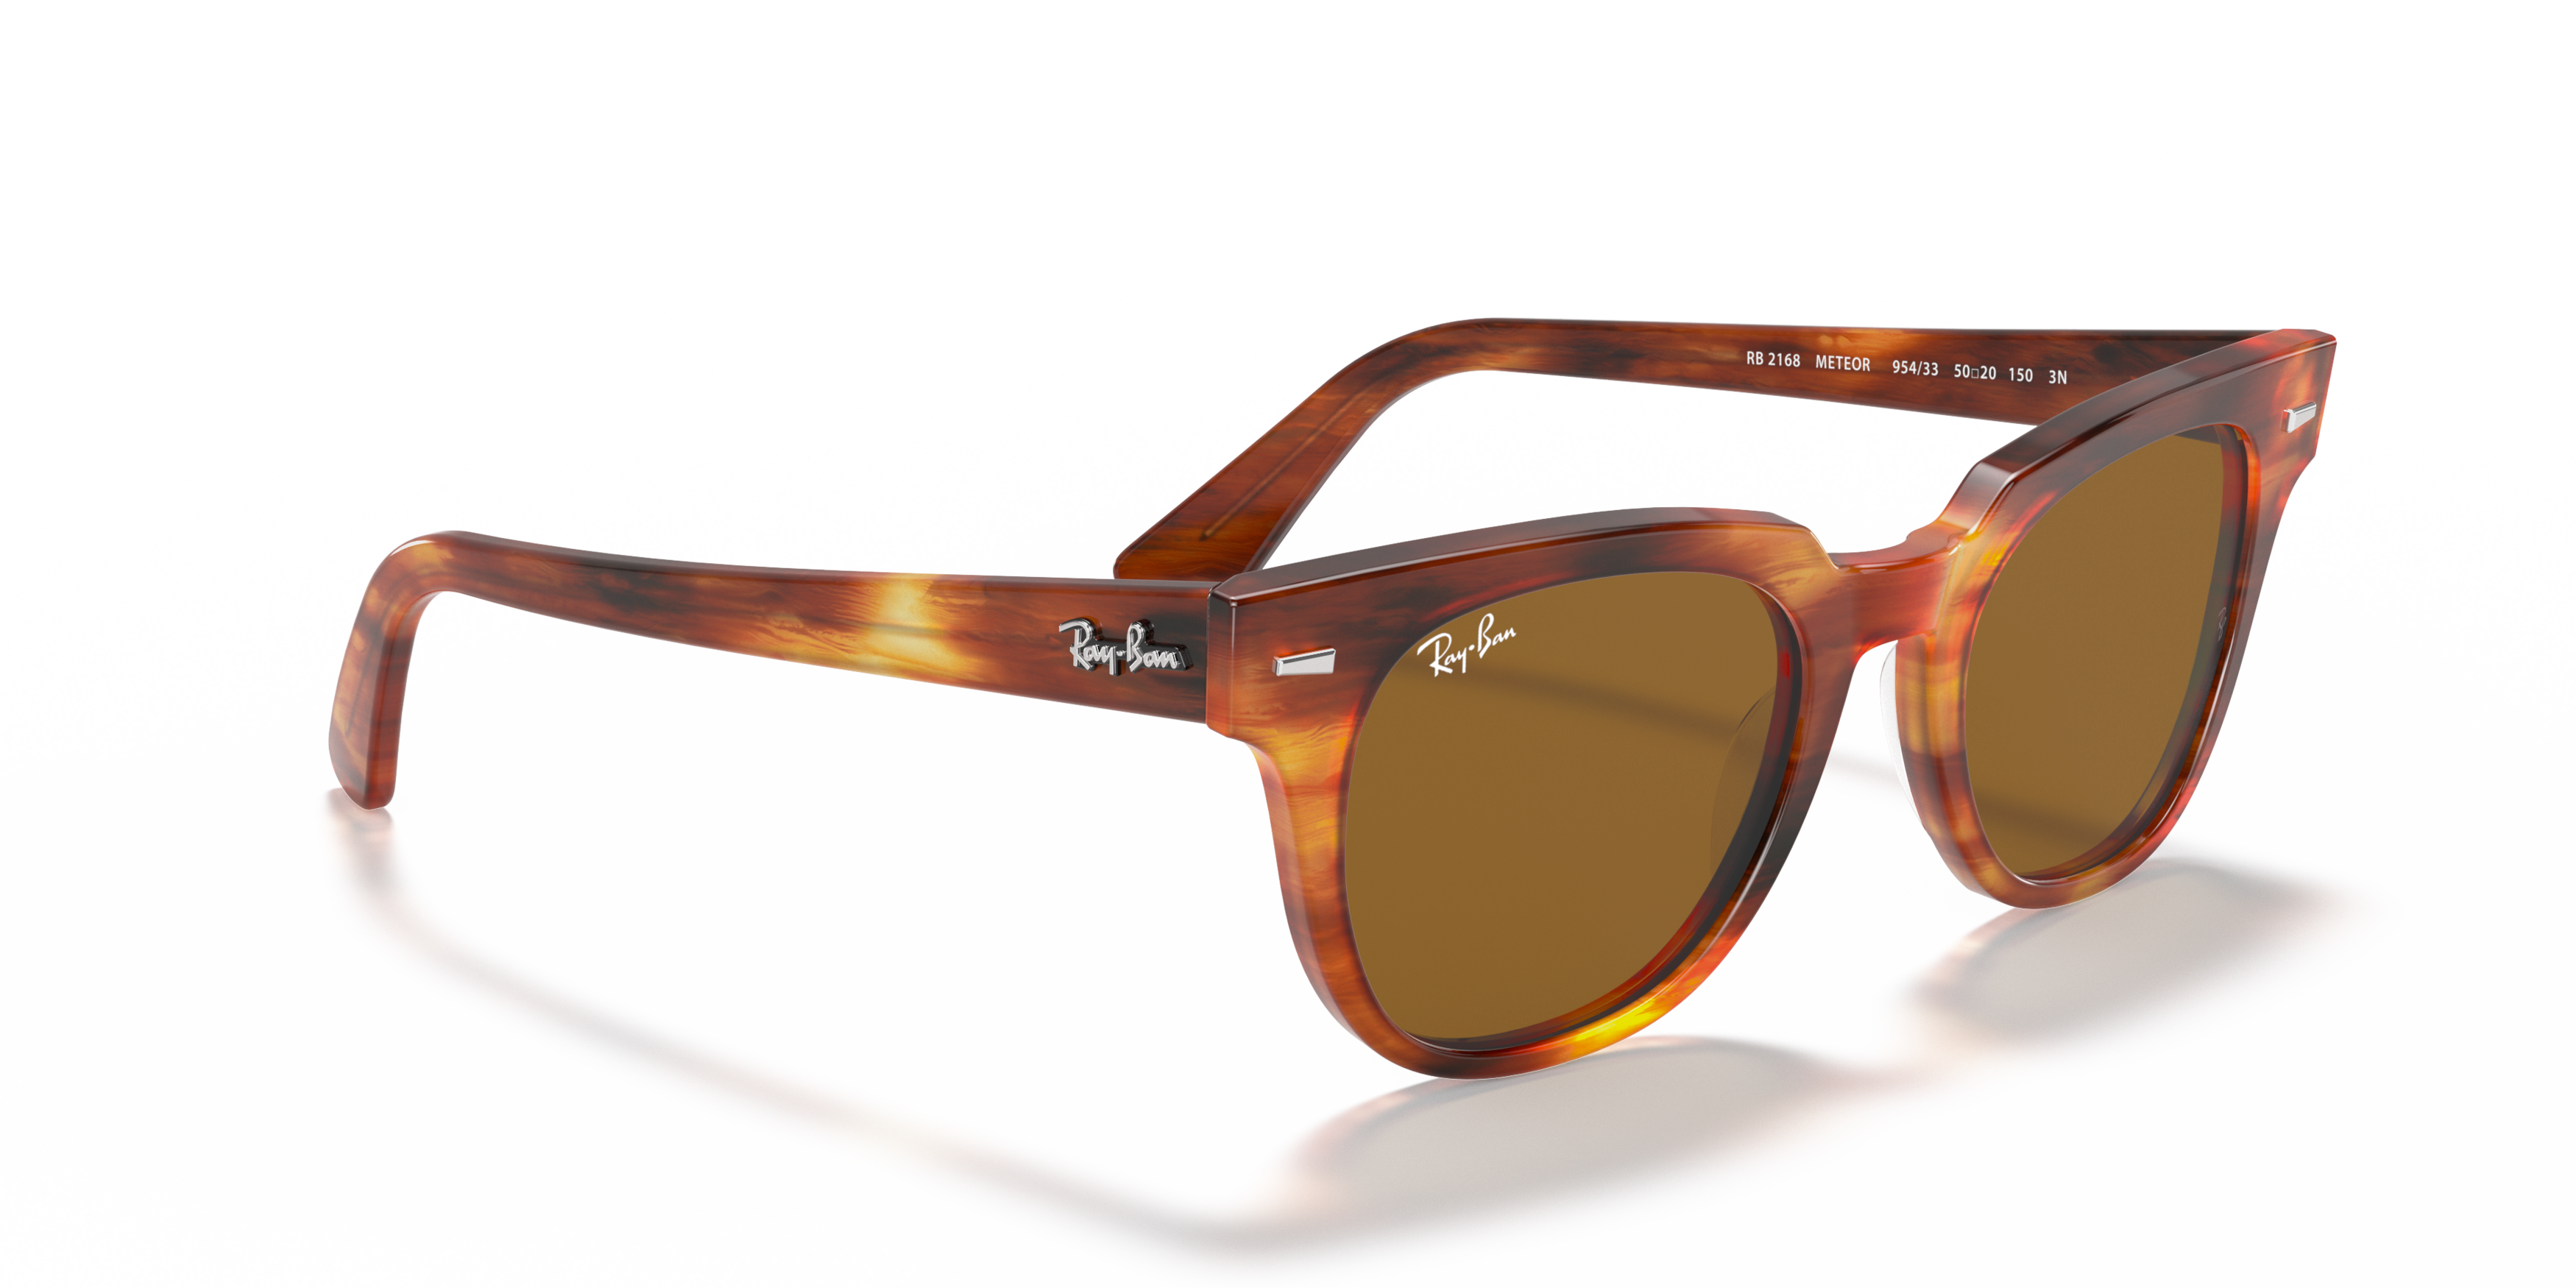 Angle_Right01 Ray-Ban Meteor RB 2168 Sunglasses Brown / Tortoise Shell